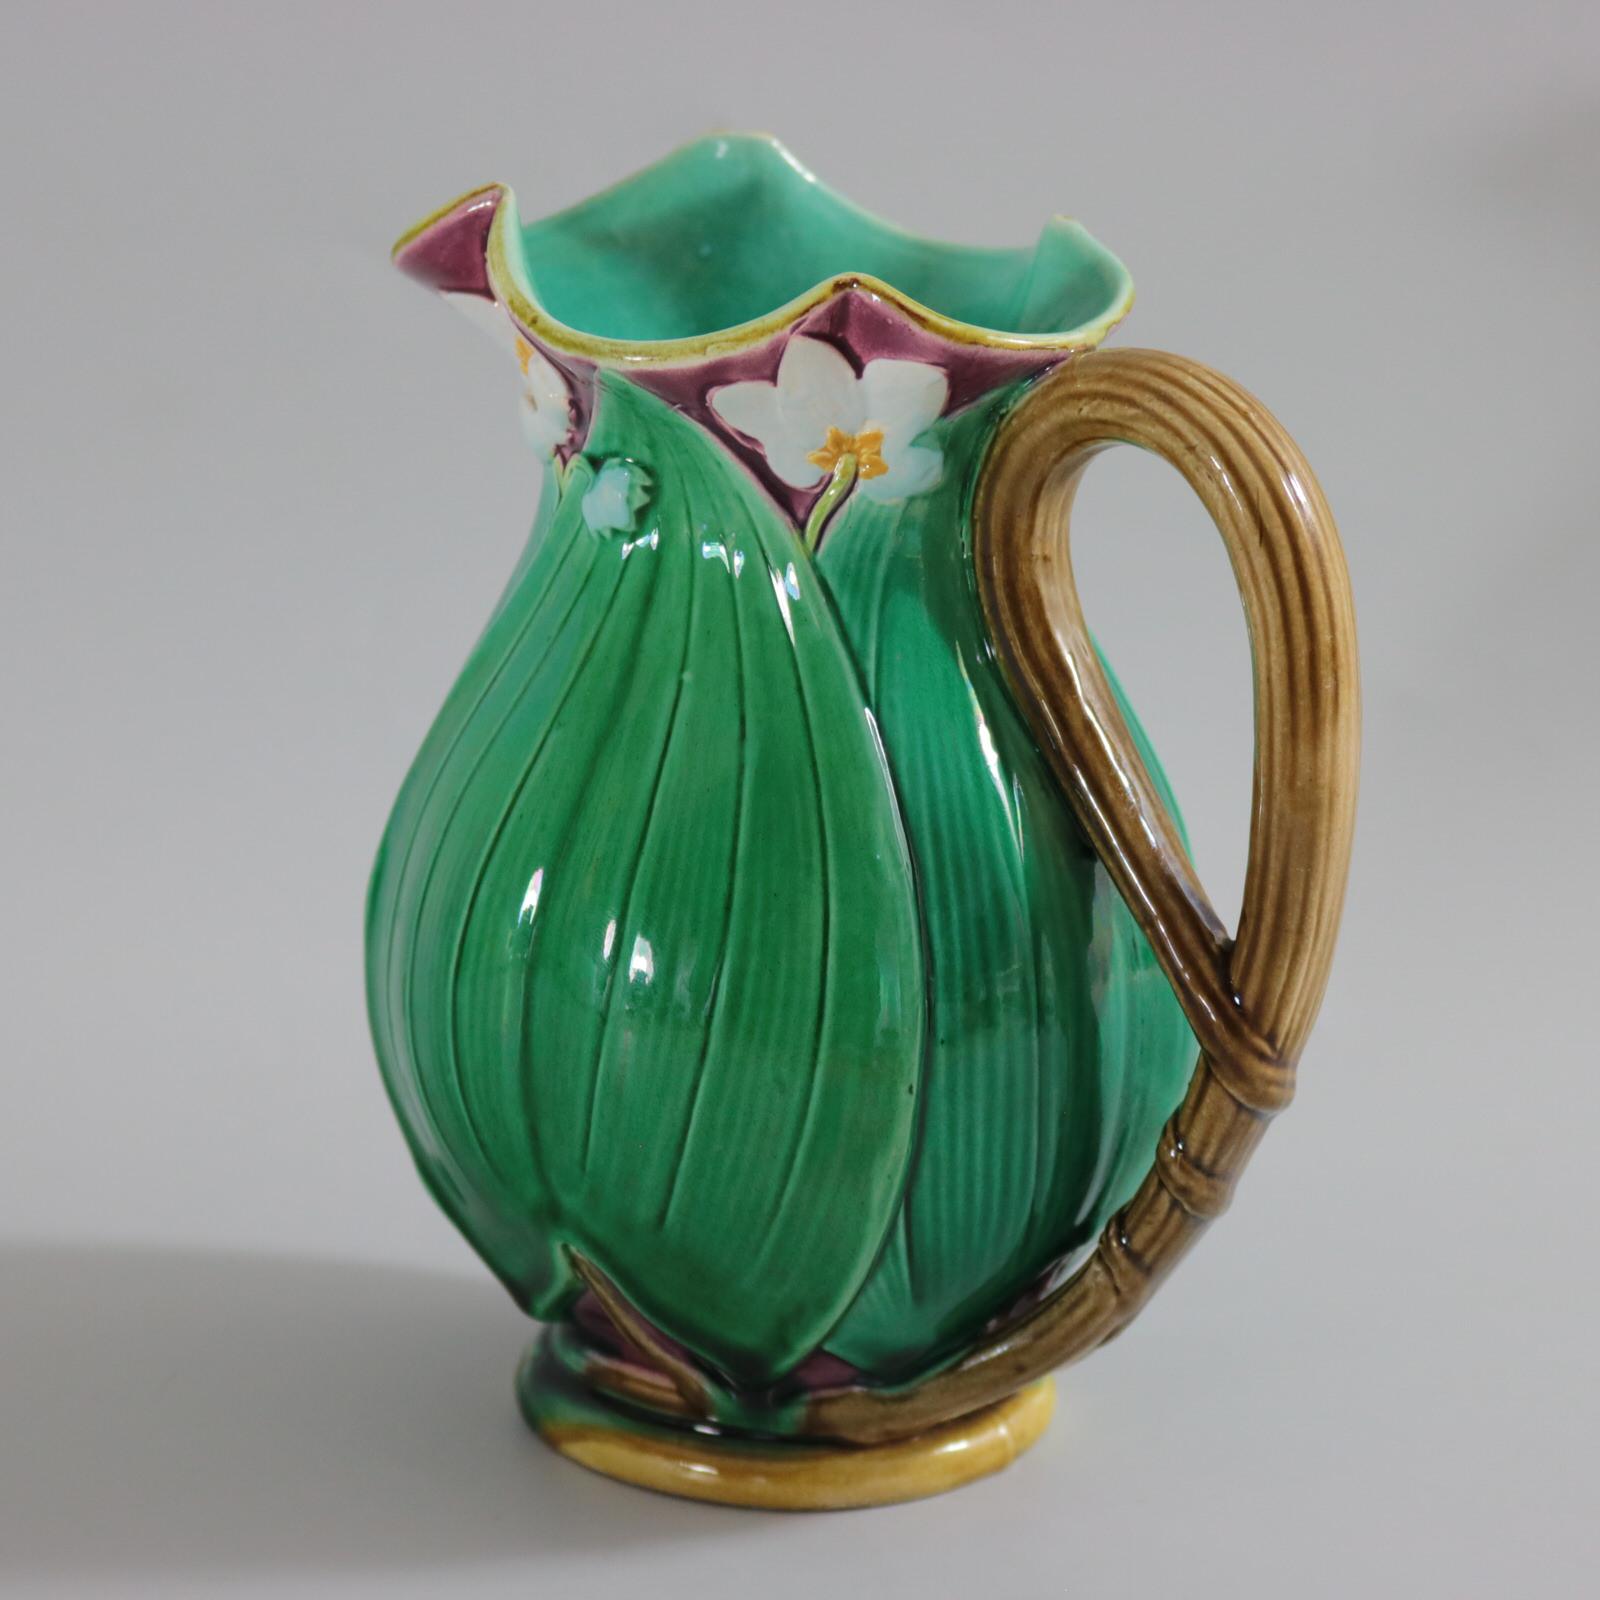 Minton Majolica jug/pitcher which features flowering lilies and lily pads. Colouration: green, dark pink, white, are predominant. The piece bears maker's marks for the Minton pottery. Bears a pattern number, '1228'. Marks include a factory specific